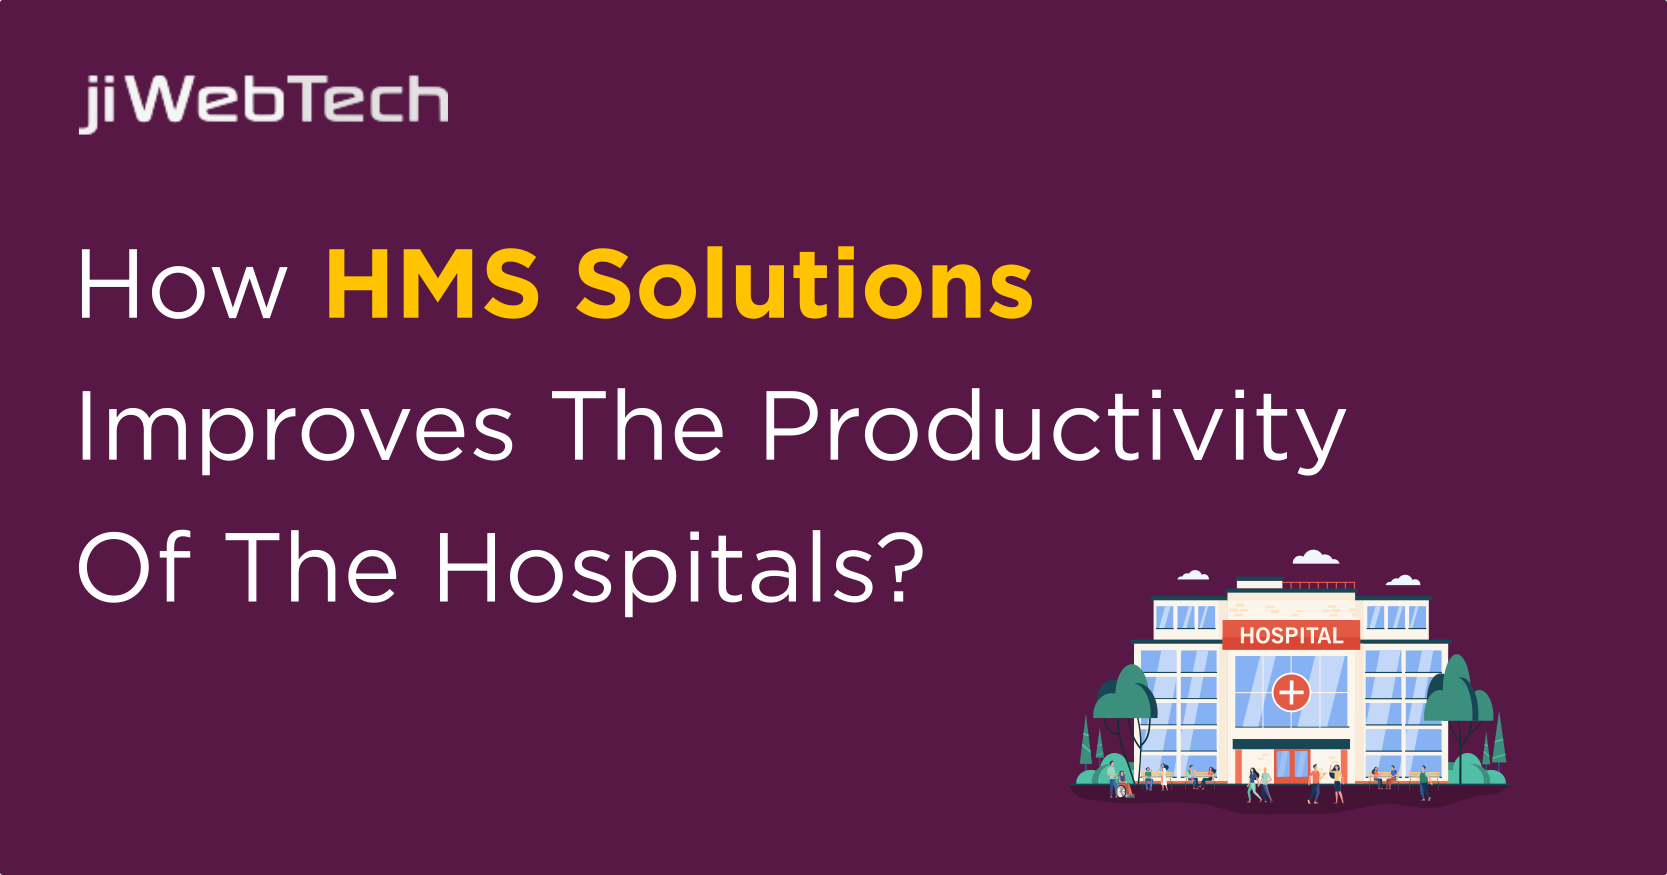 How HMS Solutions Improves the Productivity of the Hospitals?